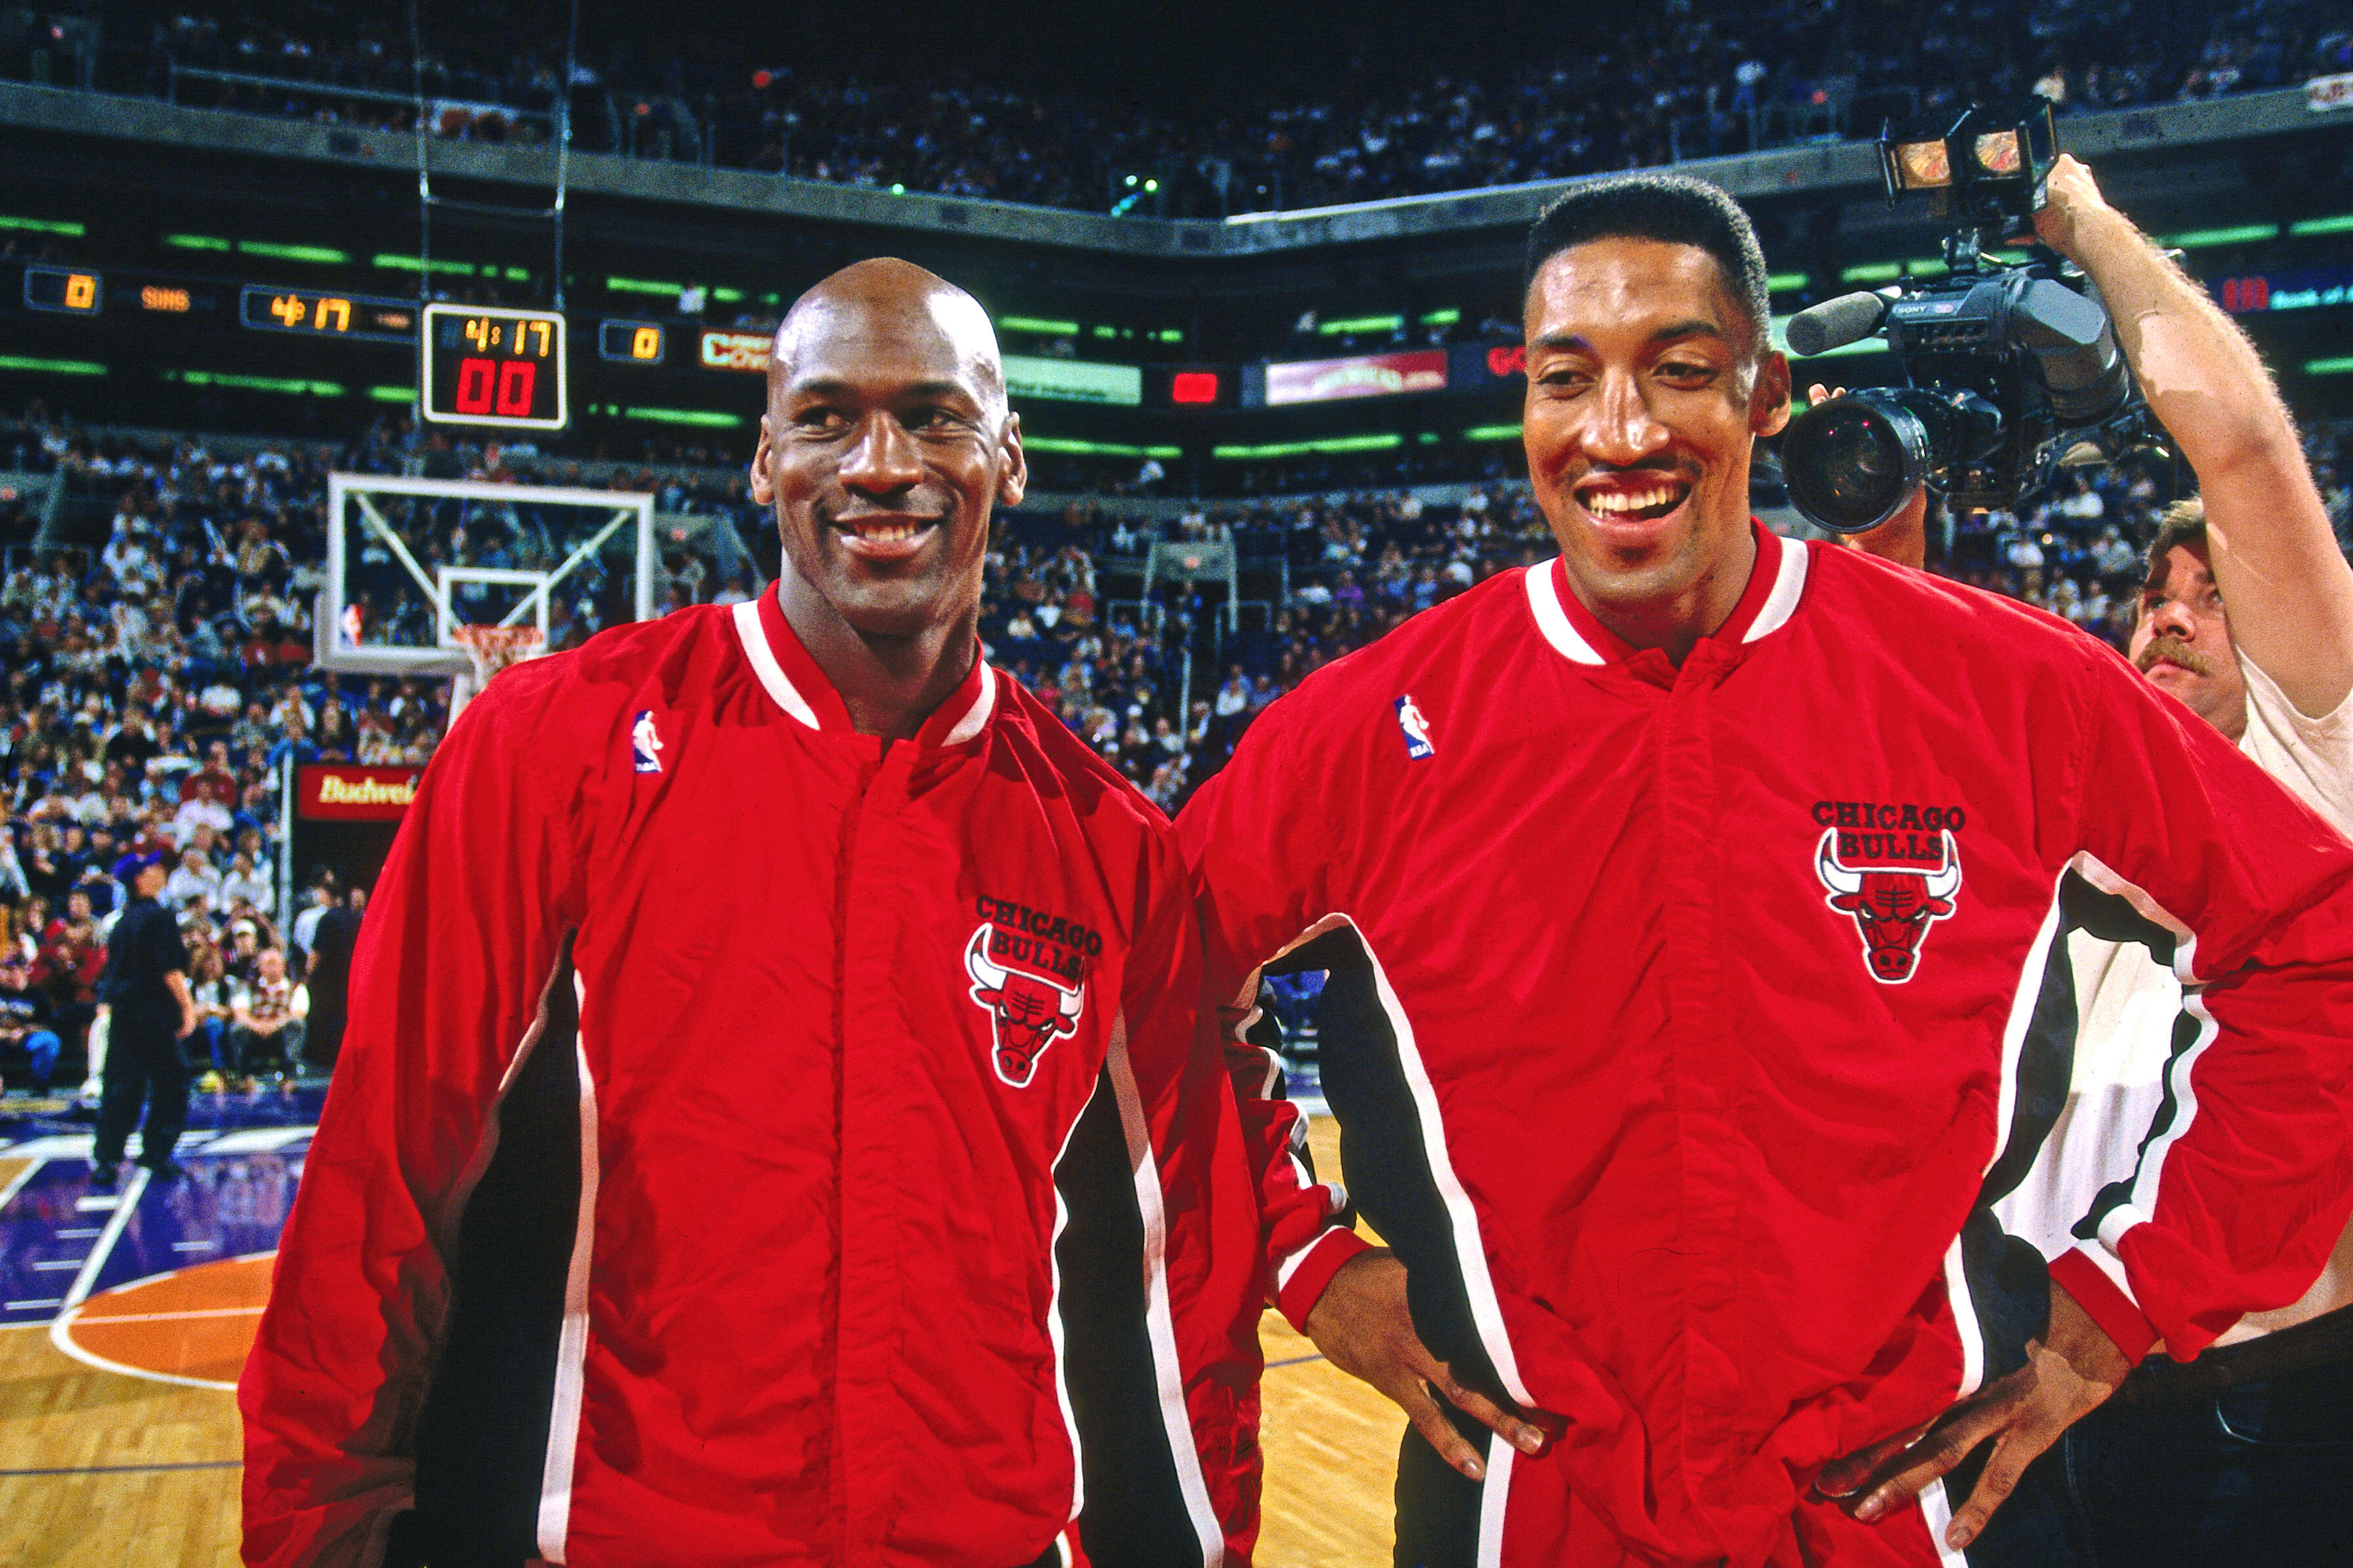 Scottie Pippen started out as the equipment manager in college